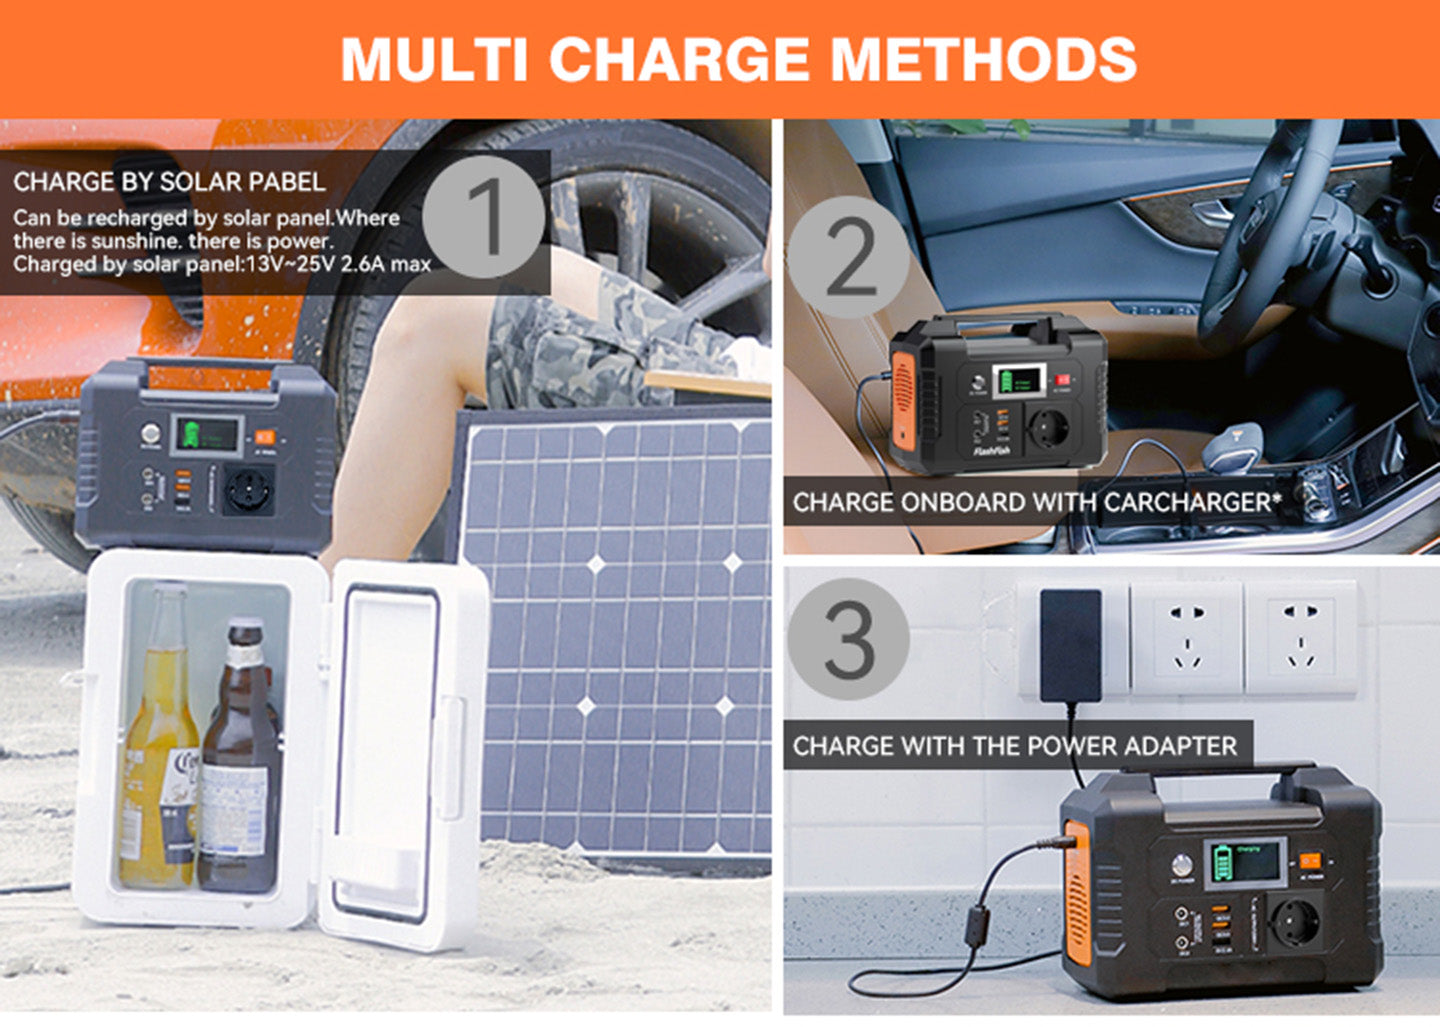 Insturction on Multiple charge method, charge by solar panel, charge by car charger, charge at wall socket , portable power station, Flashfish e200, outdoor power supply, emergency power, battery backup, renewable energy, camping gear, off-grid living, power station review, eco-friendly gadgets, travel essentials, portable charger, adventure gear